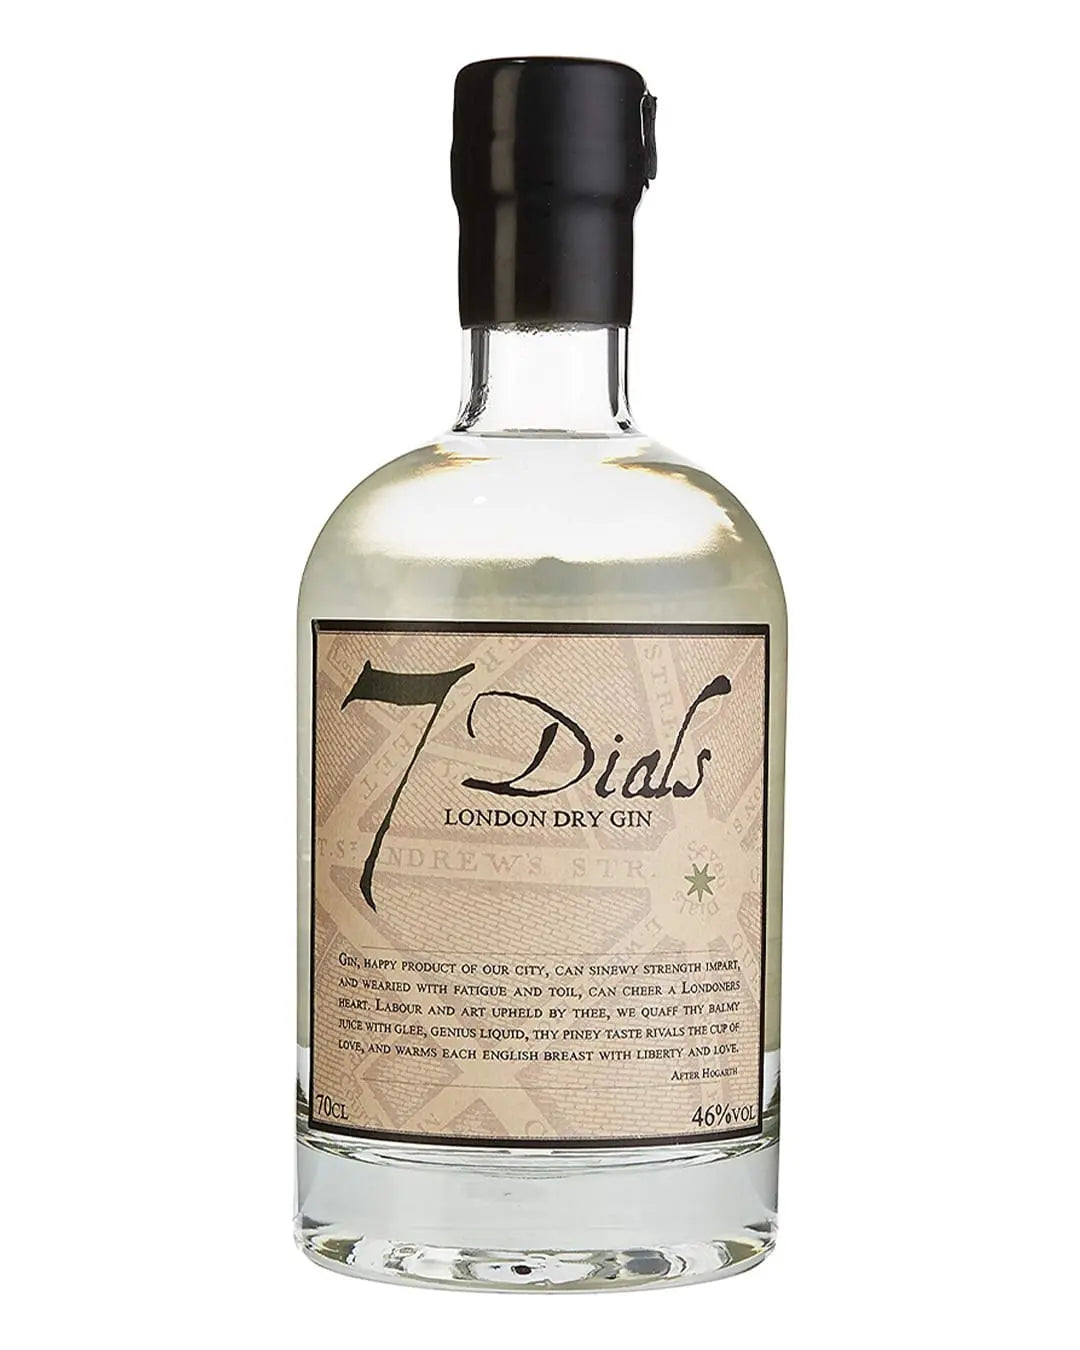 7 Dials London Dry Gin, 70 cl Gin 5052598010126